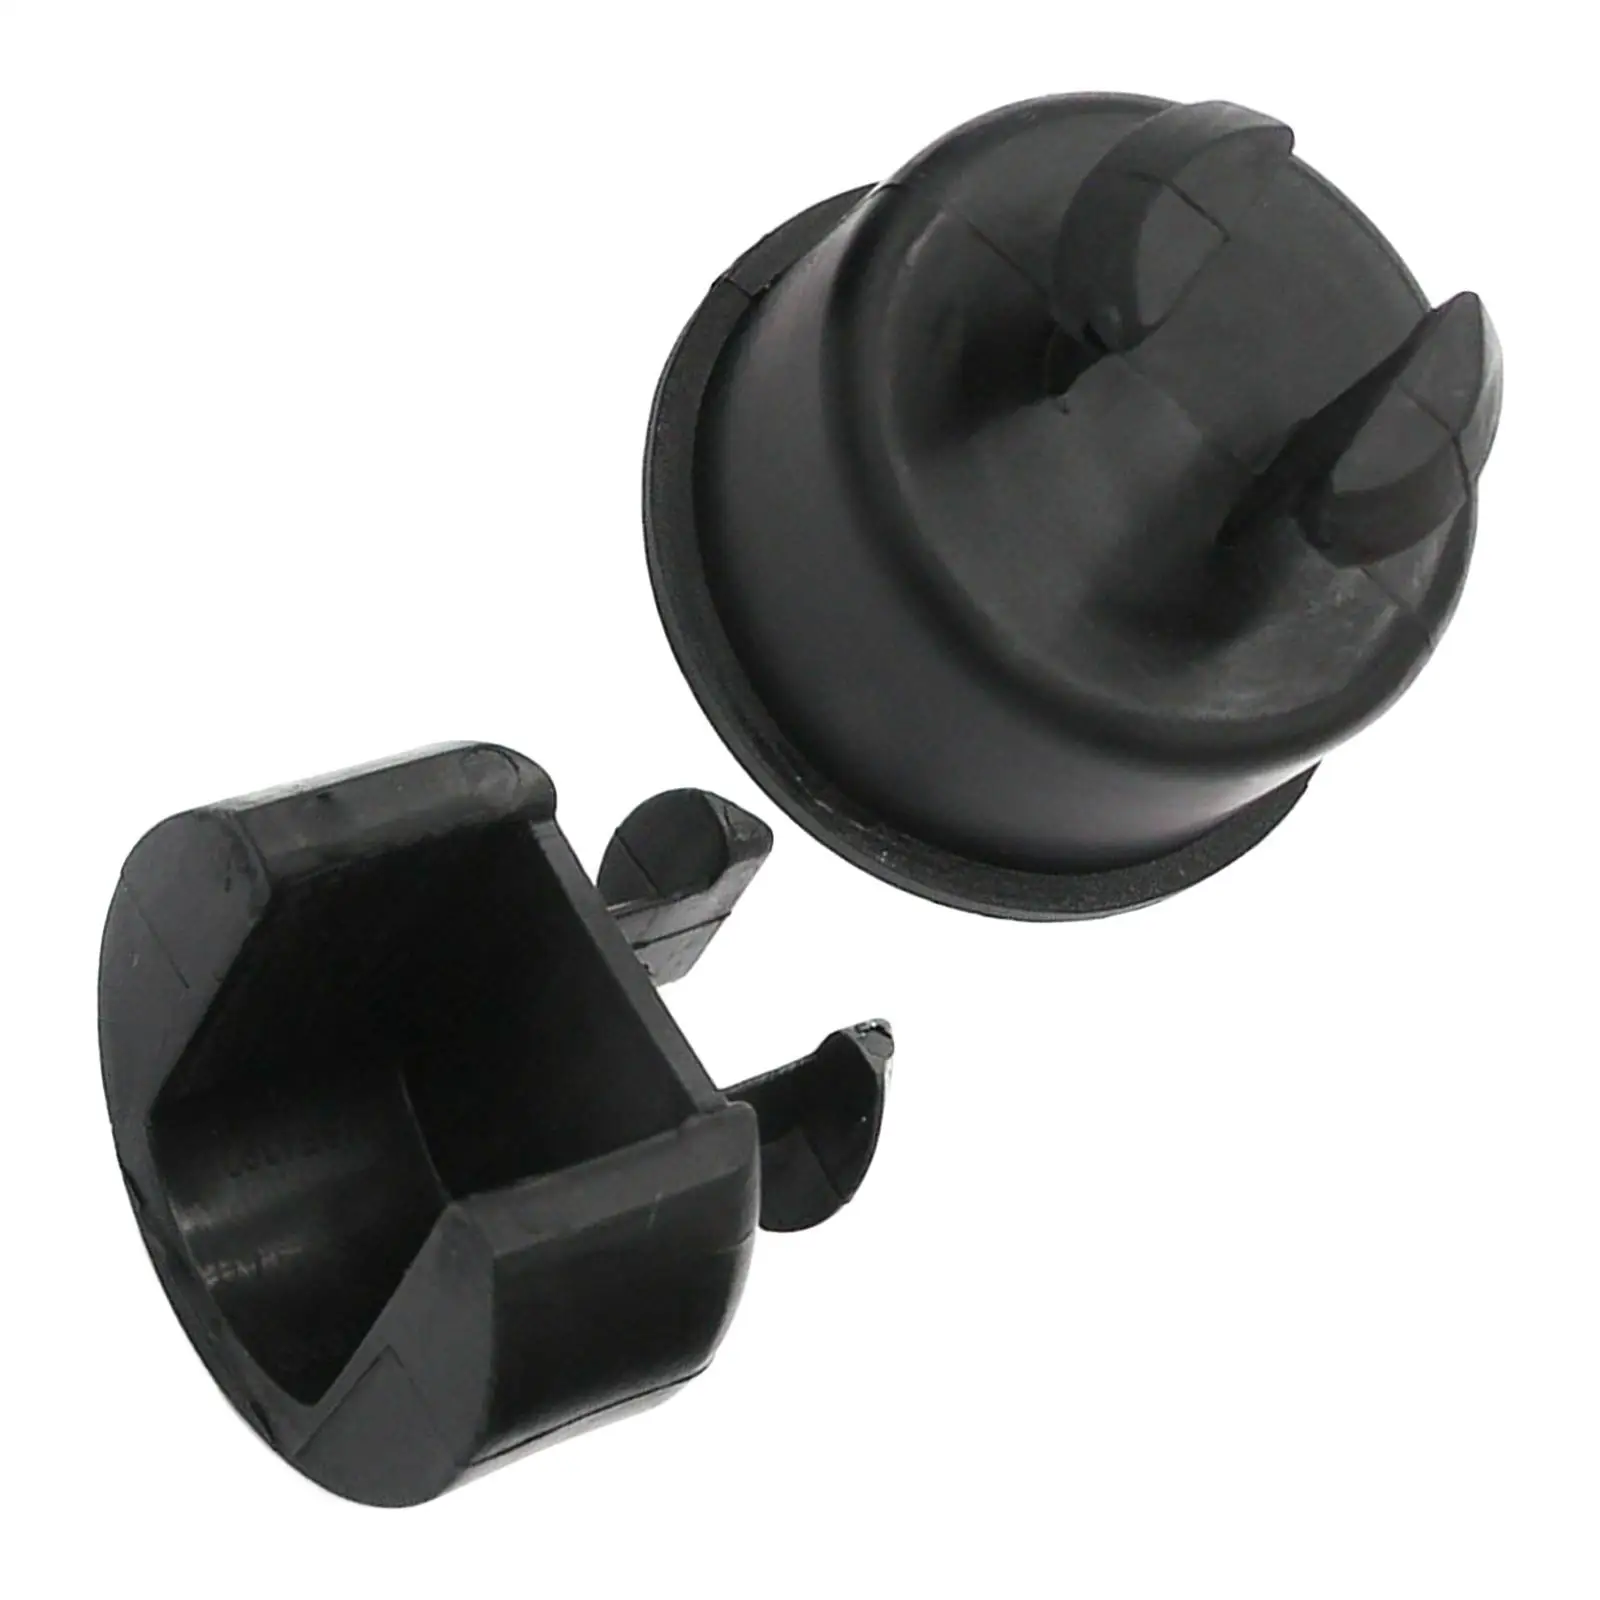 Set of 2 Tailgate Pivots Bushings Left and Right Car Supplies Black Plastic Assembly Fit for RAM 1500 2500 2002-2009 55276077Ab